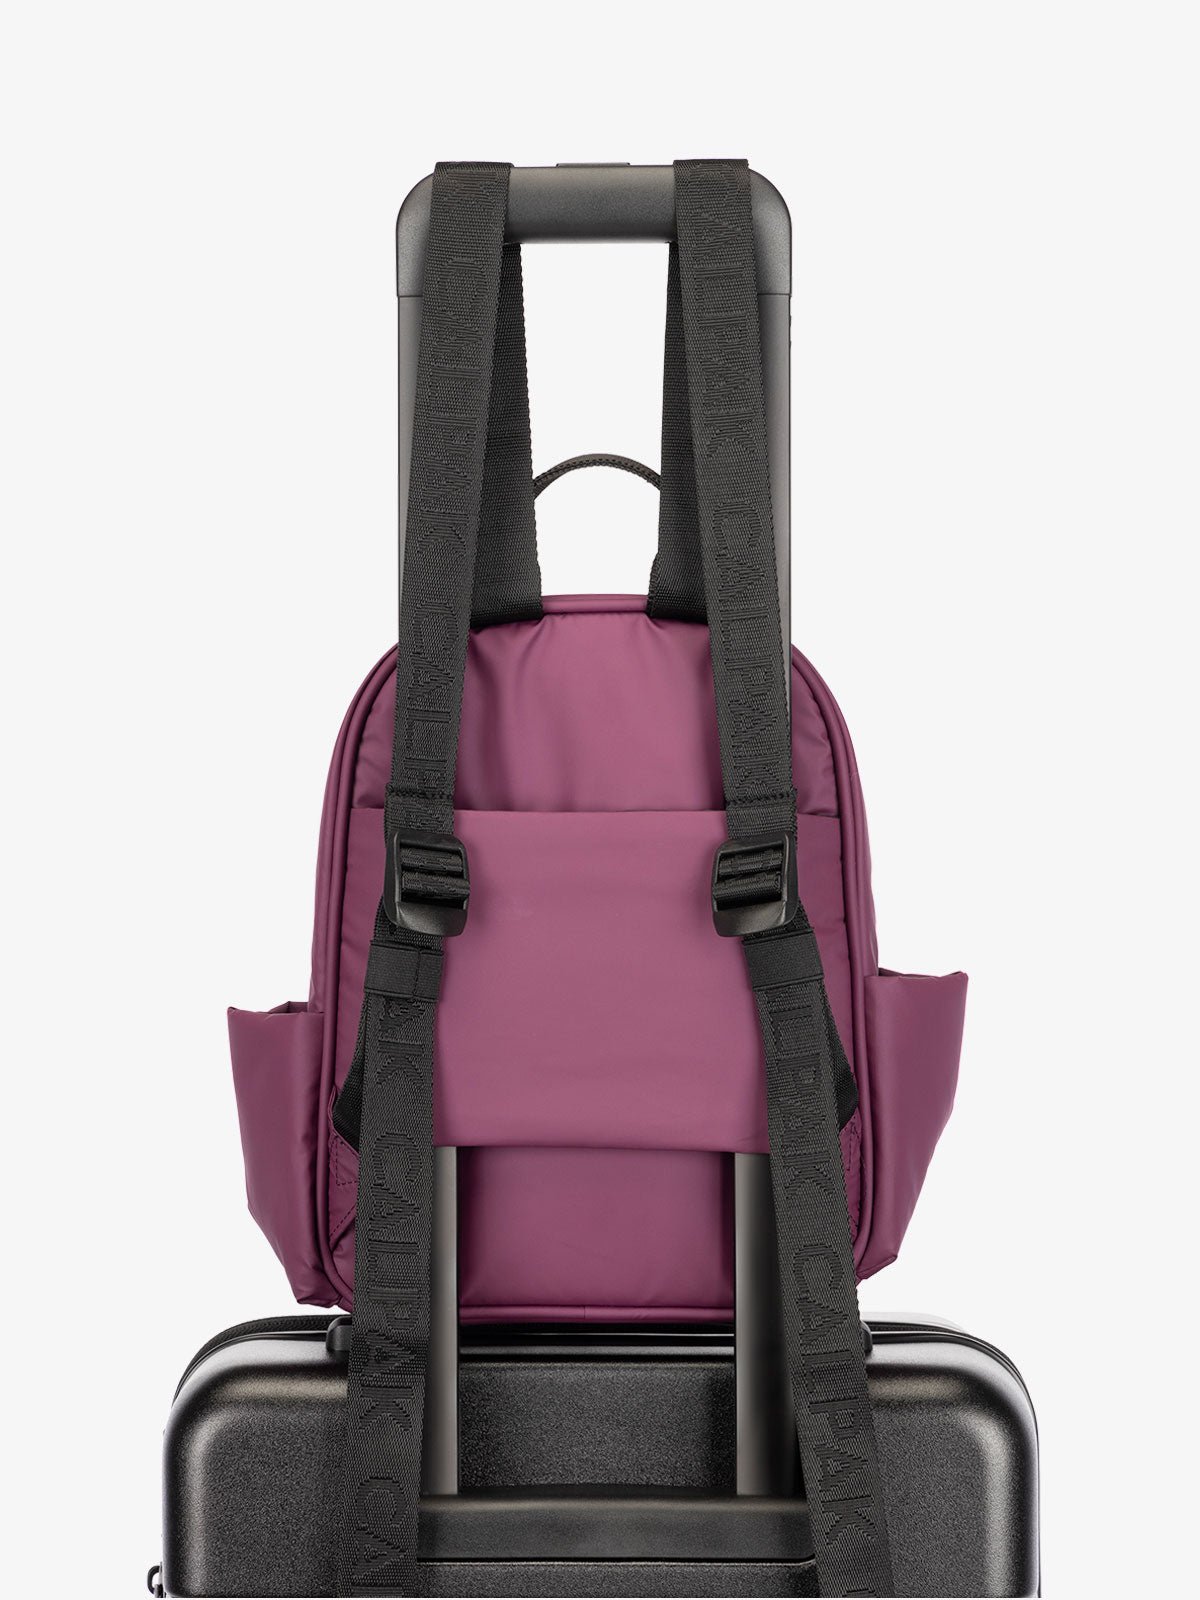 CALPAK Luka small travel Backpack with luggage sleeve and adjustable straps in purple plum